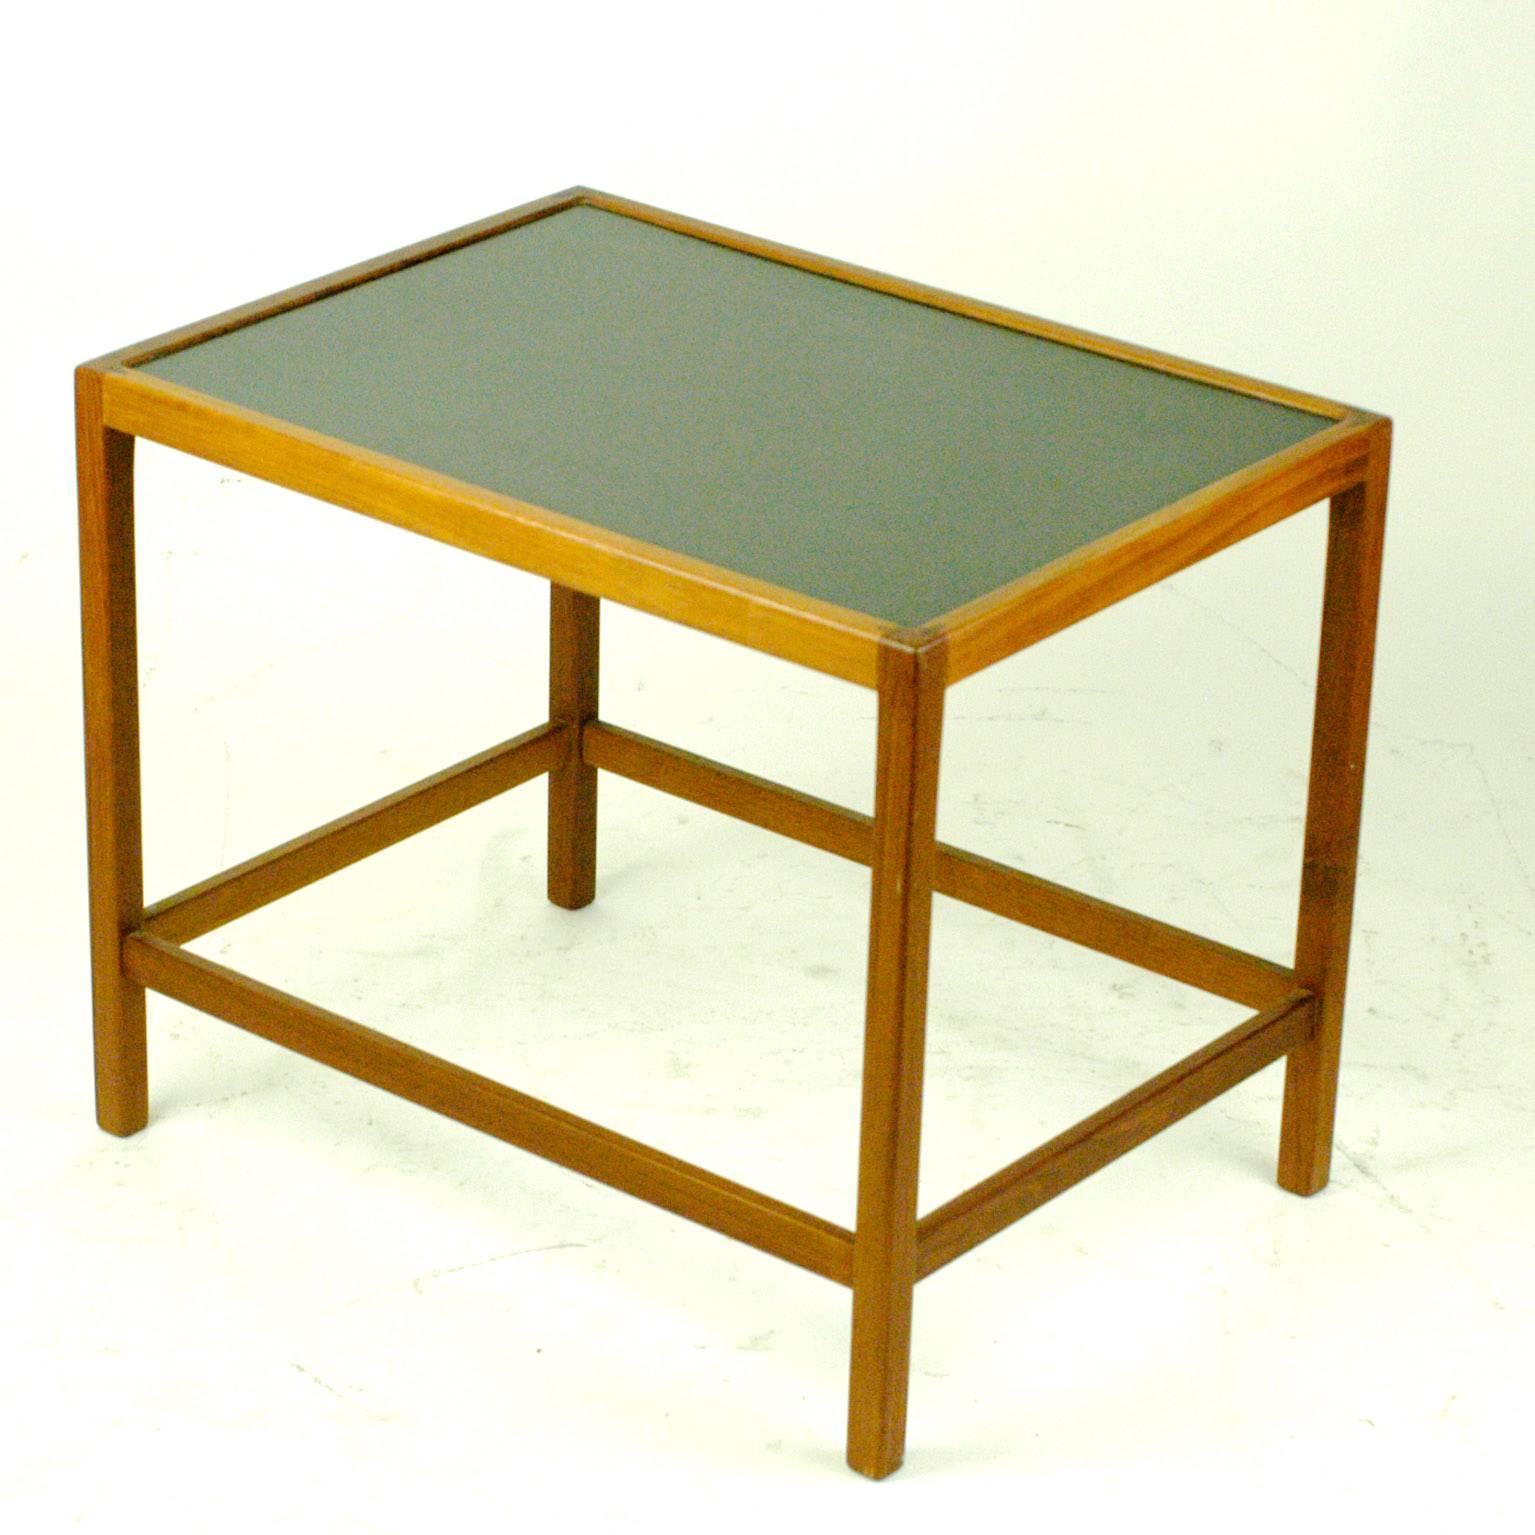 Danish 1960s teak side table with formica top and beautiful handcrafted details. Because of its shape, slim proportions and excellent quality of handcraft the table is attributed to Ejner Larsen and Aksel Bender Madsen.